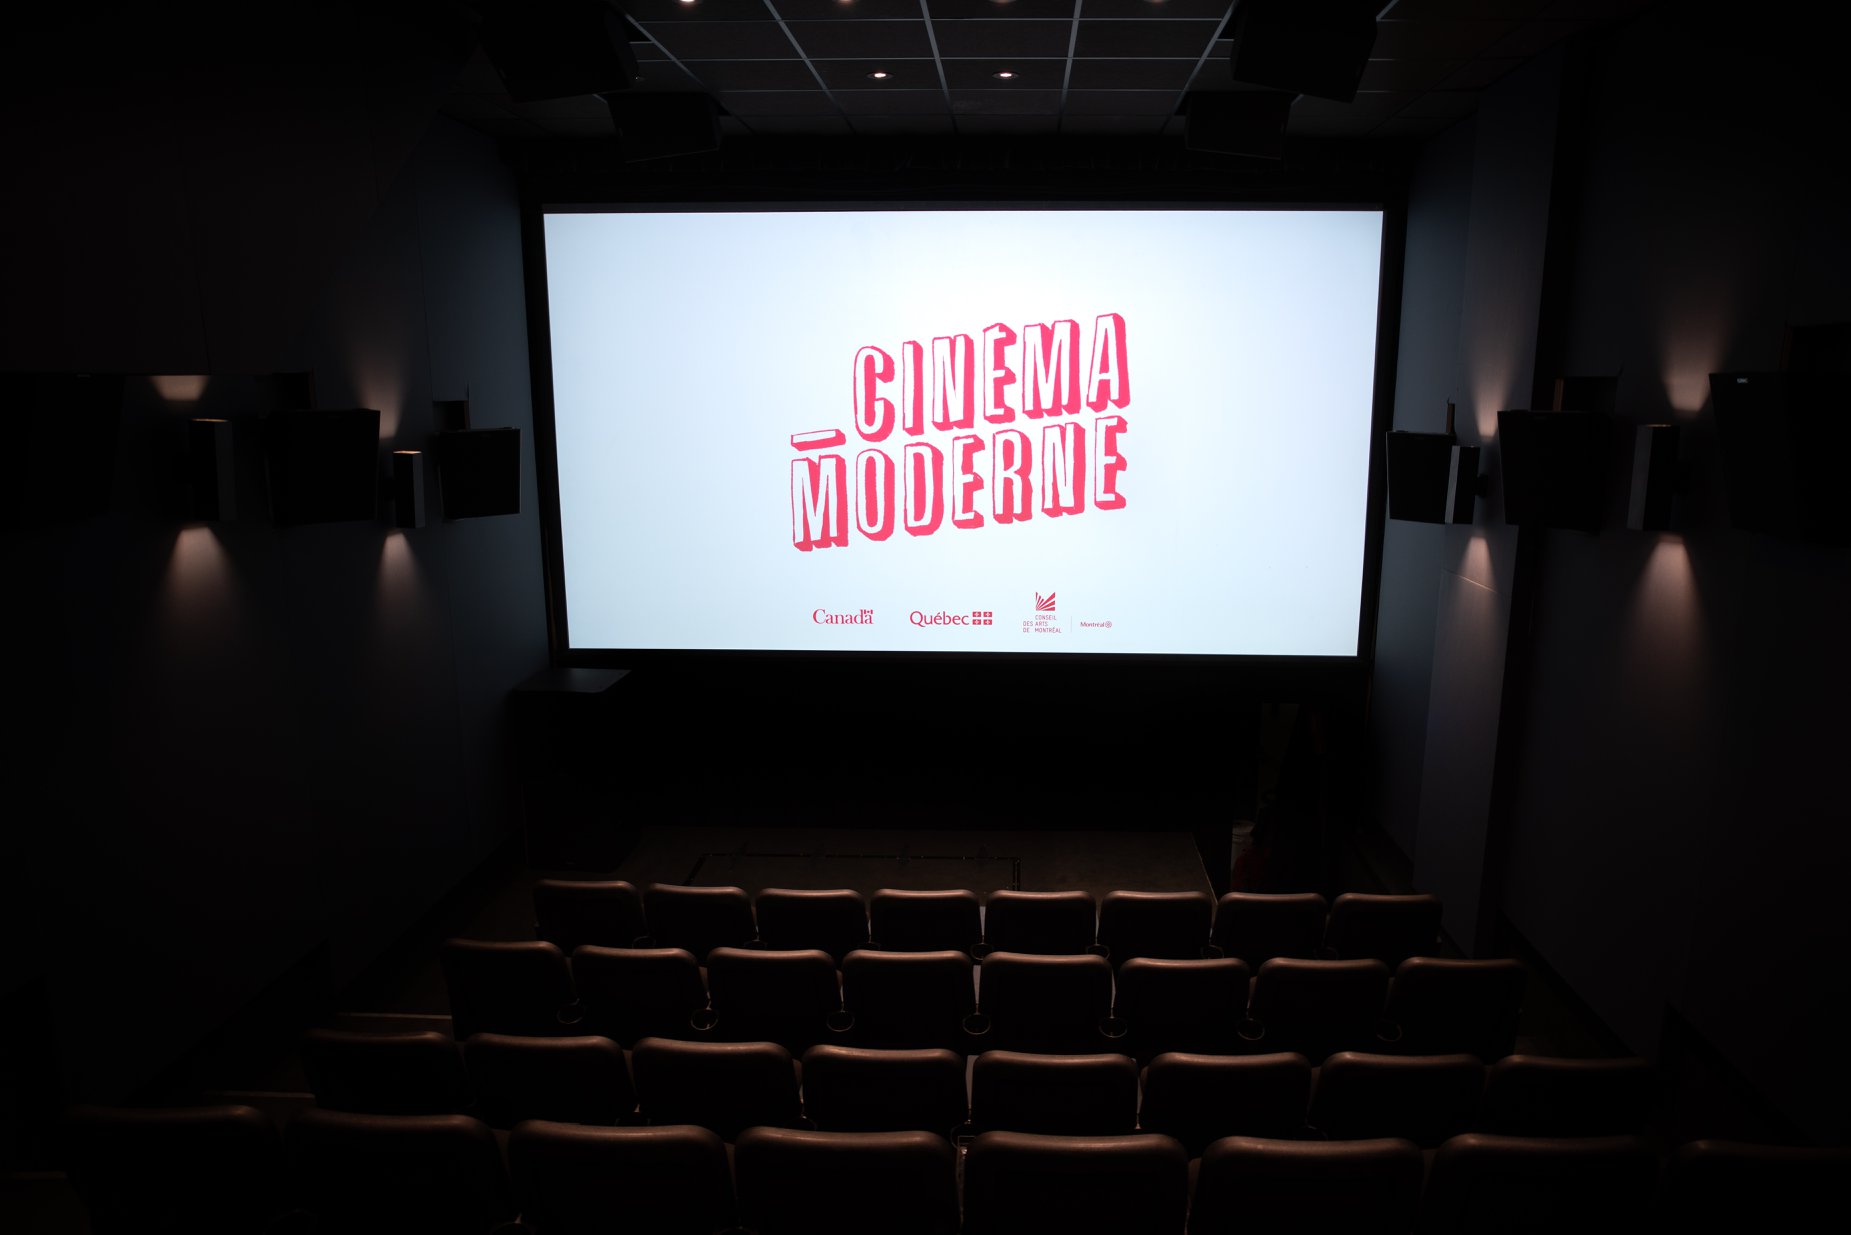 Mile End’s new cinema space, Cinéma Moderne, is now open